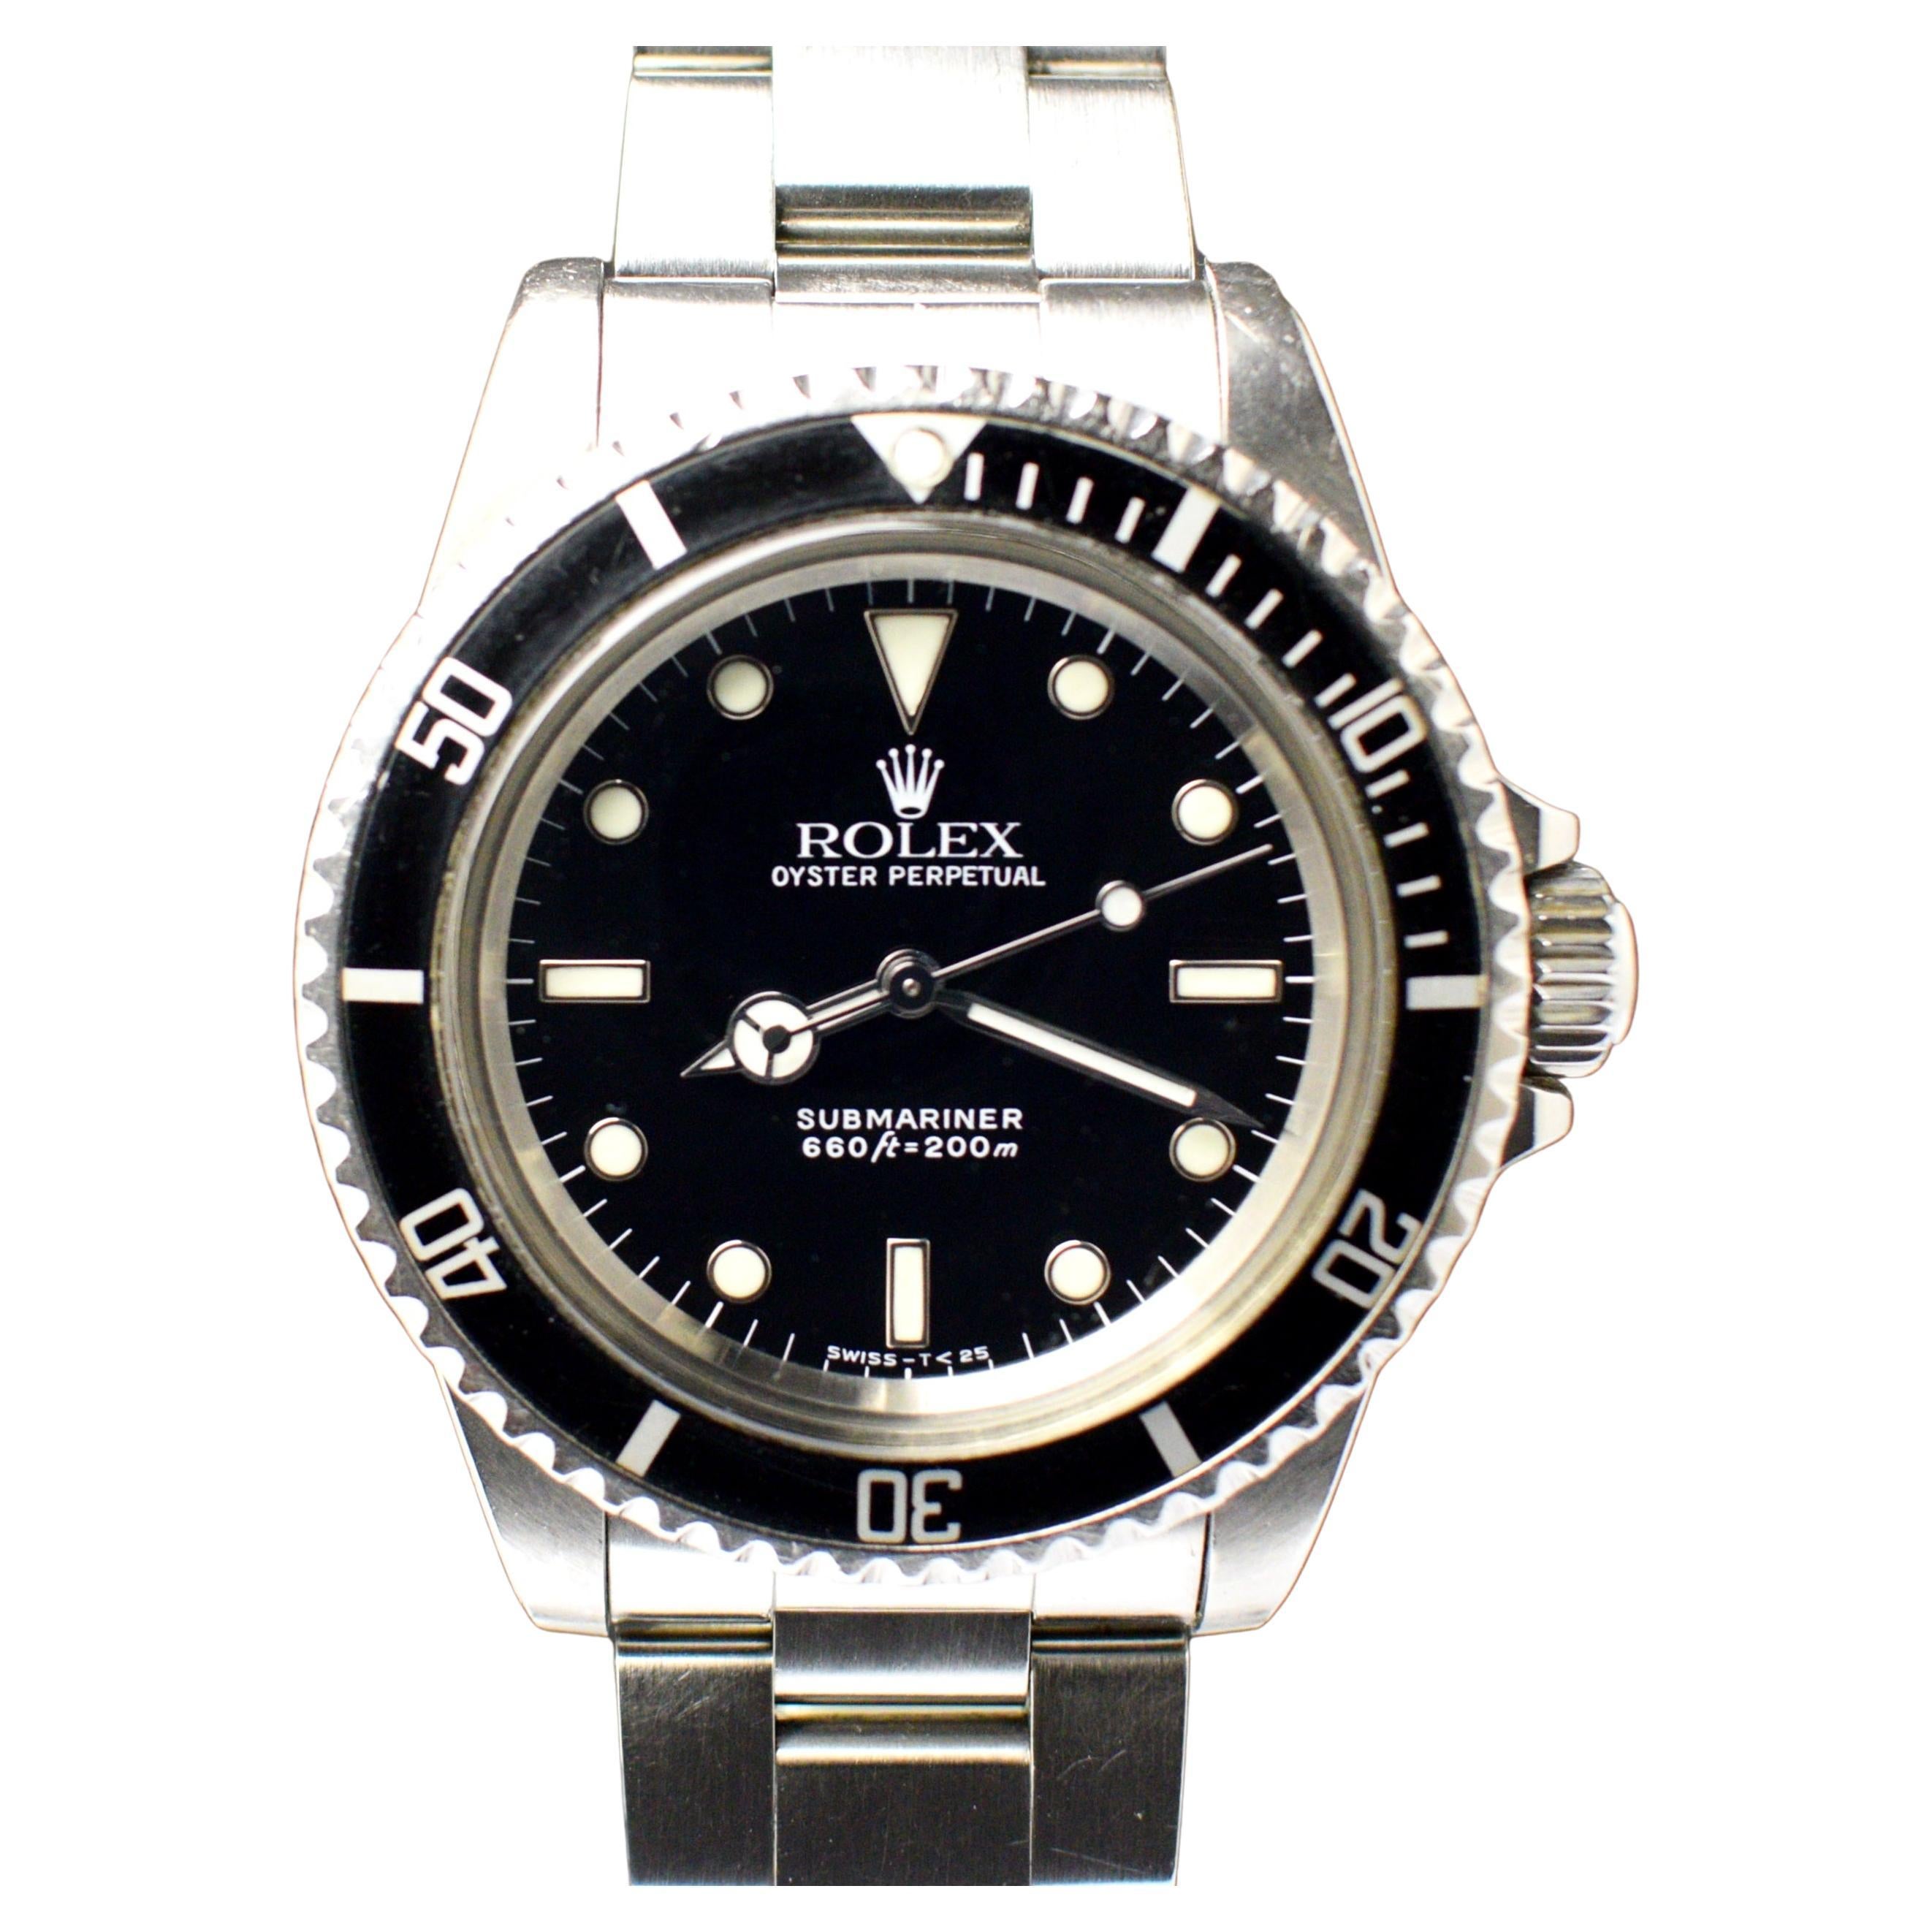 Rolex Submariner Glossy Dial 5513 Steel Automatic Watch, 1985